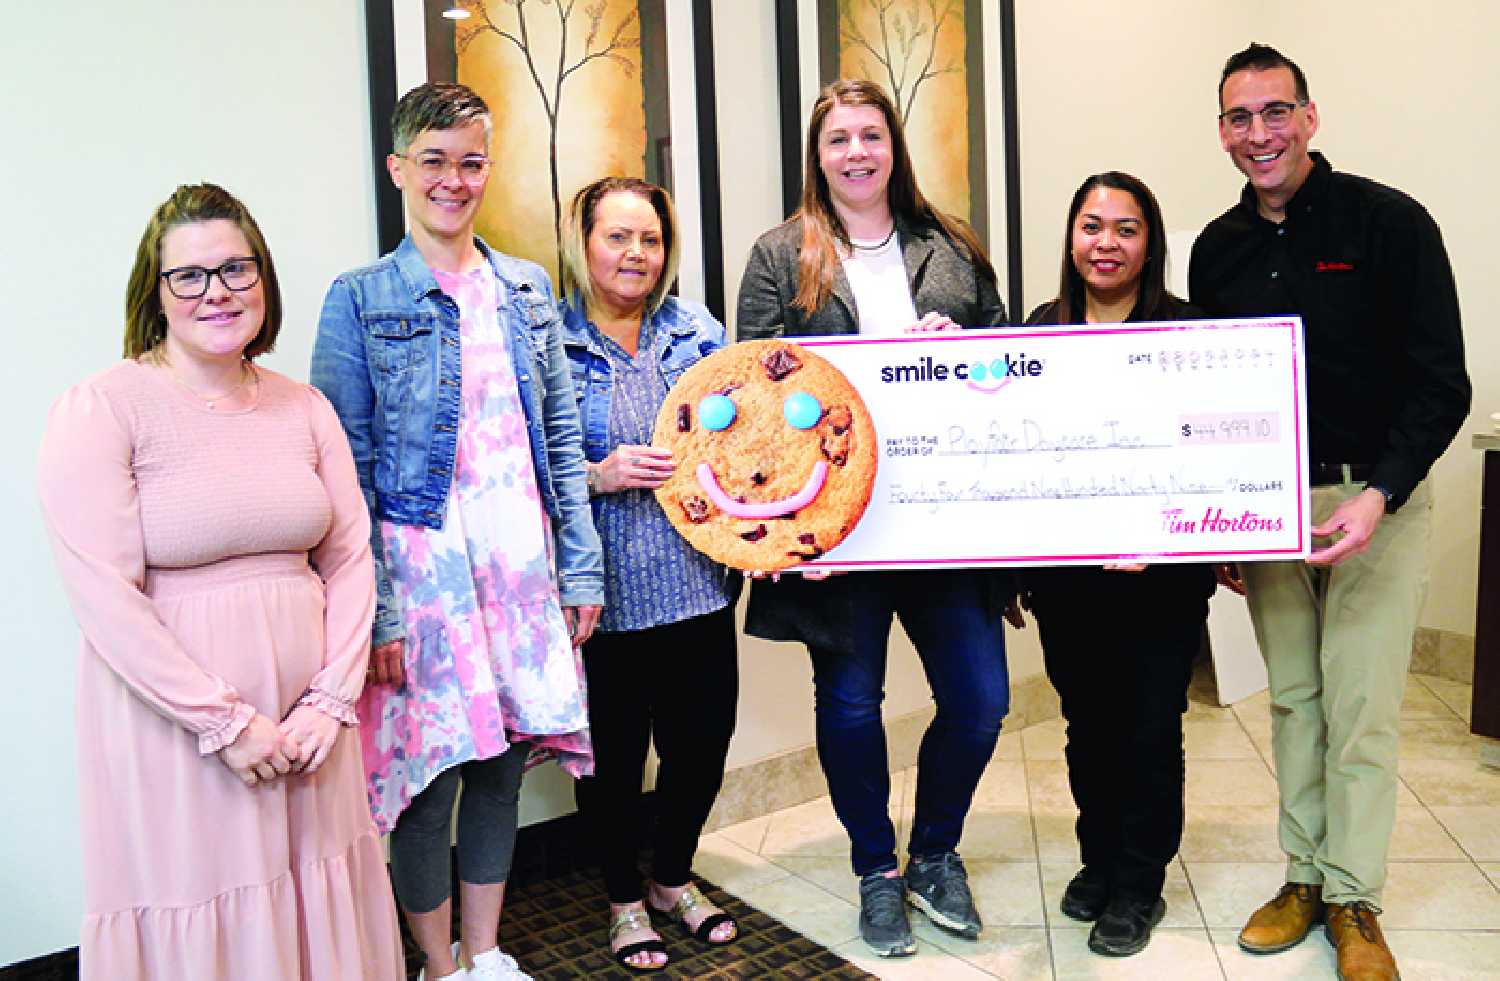 Tim Hortons presented $45,000 to Play Fair Daycare at the Moosomin Chamber of Commerce meeting Wednesday with money raised from its spring Smile Cookie fundraiser. From left are Samantha Campbell, Ami Leduc, Terri Lowe, and Jill Jones with the daycare committee, and Cherrie Caliwag and Greg Crisanti with Tim Hortons Moosomin. Moosomin was first in Saskatchewan and sixth in Canada for Smile Cookie sales.